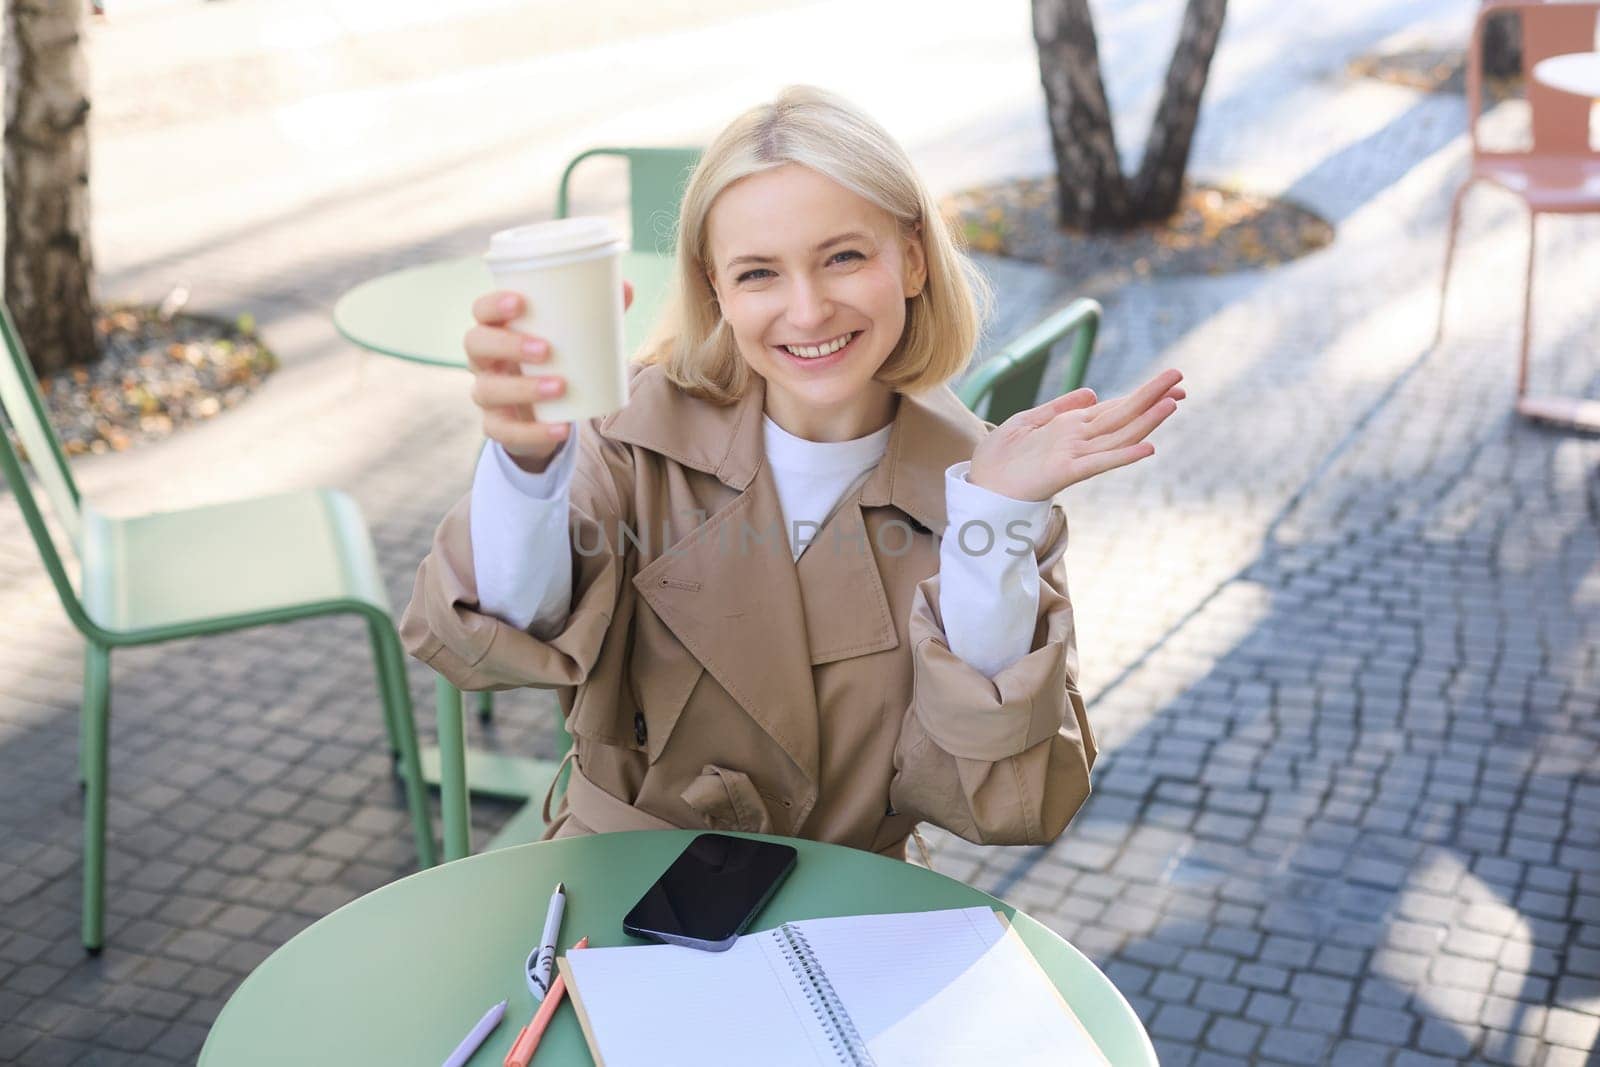 Food and drink concept. Young happy woman sitting in cafe, enjoying bright day outdoors, raising cup of coffee and smiling, drinking chai.